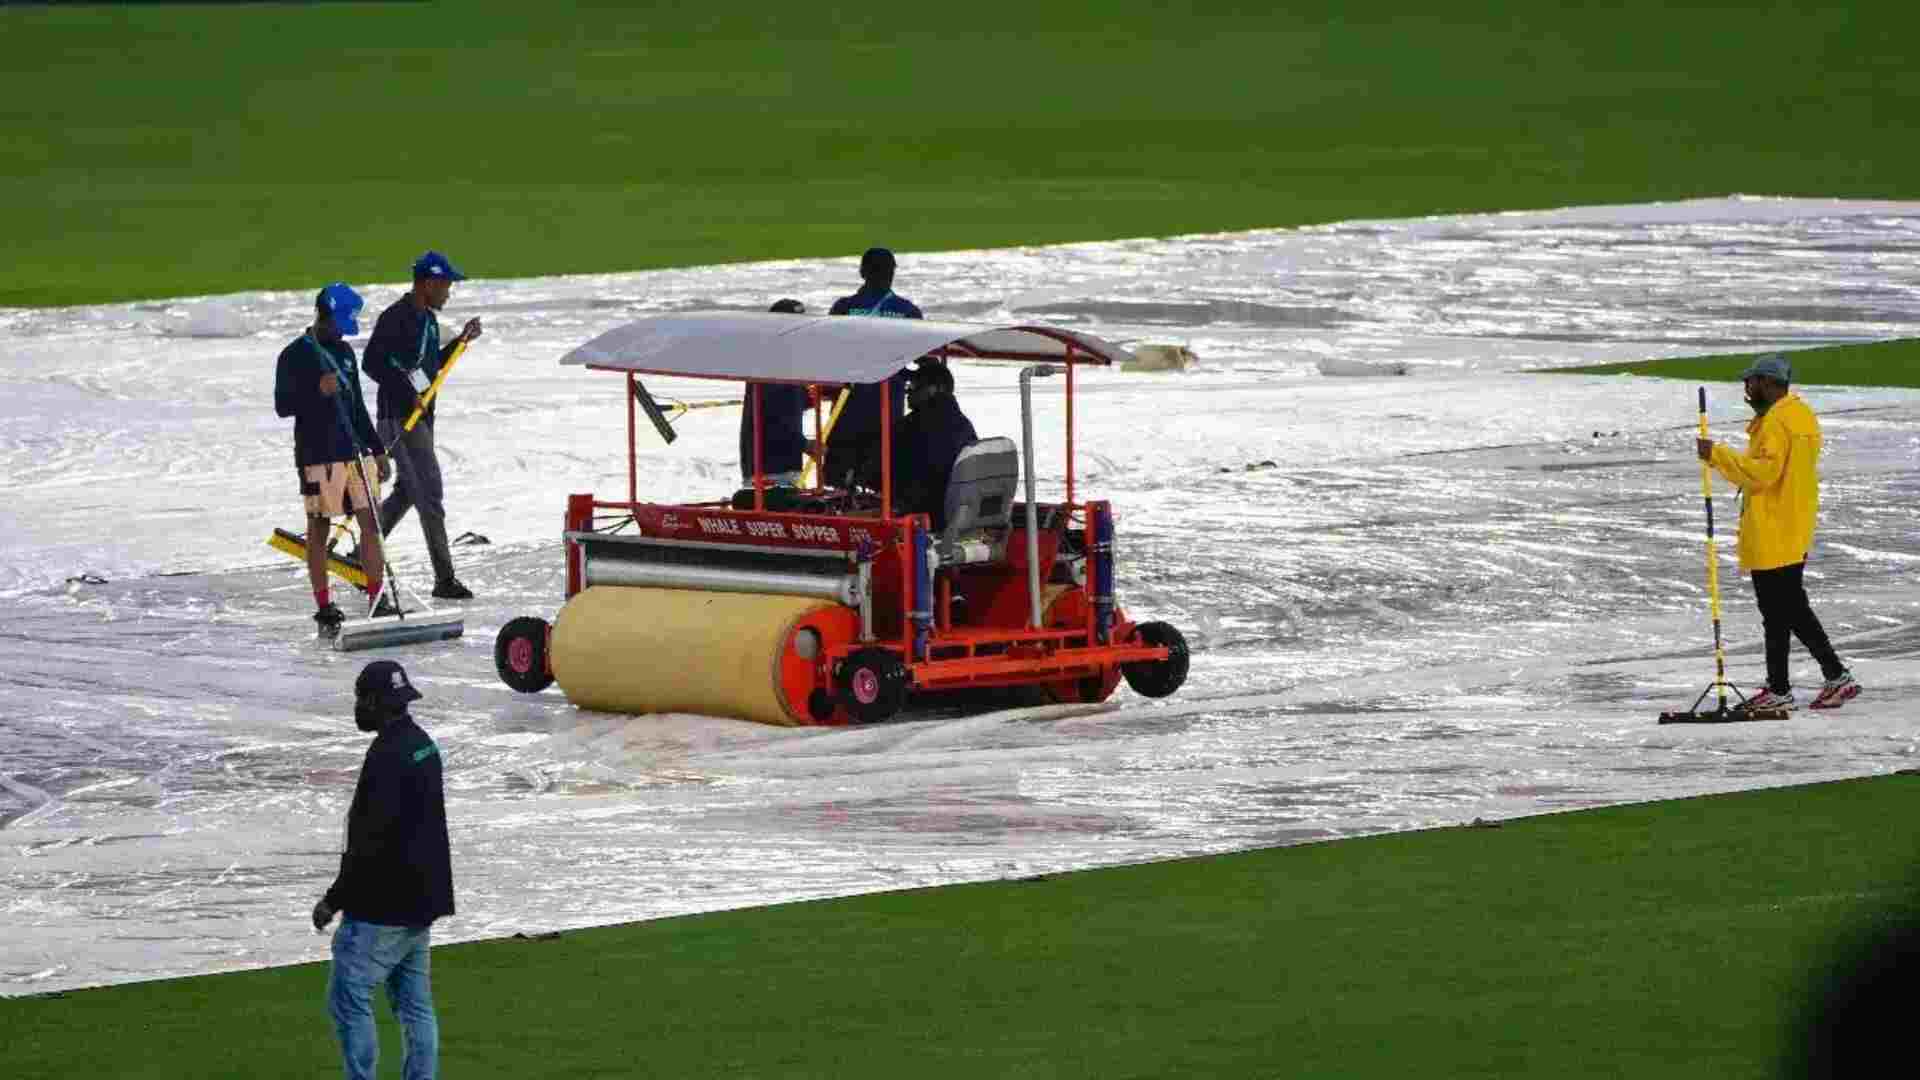 Will PAK Vs. IRE in Florida witness a washout ?